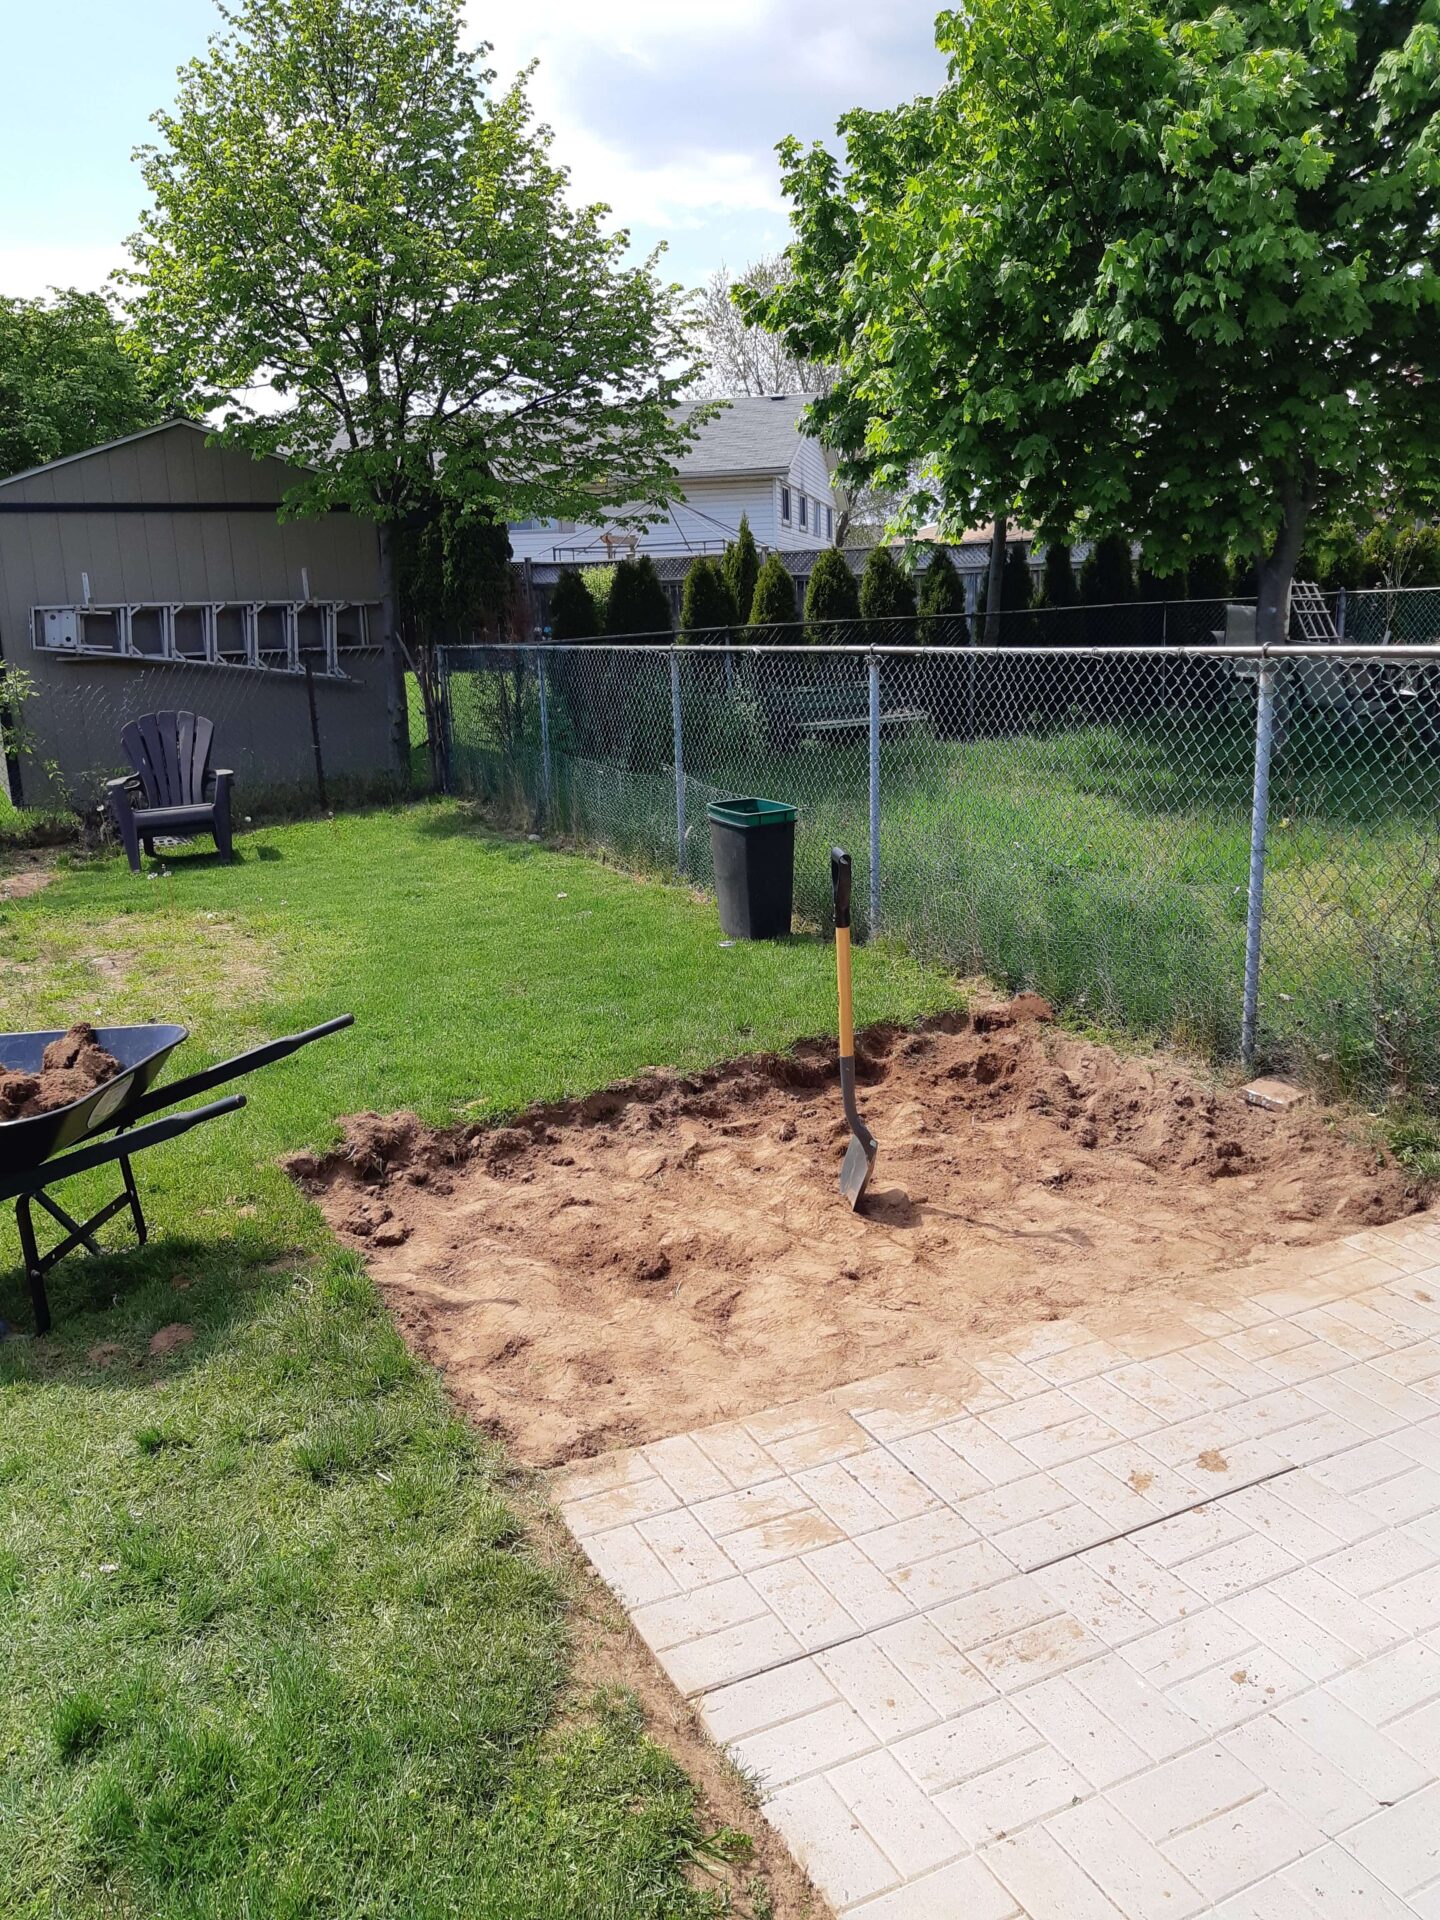 A yard under construction as an example for a landscaping business number 21 in the list of backyard business ideas.